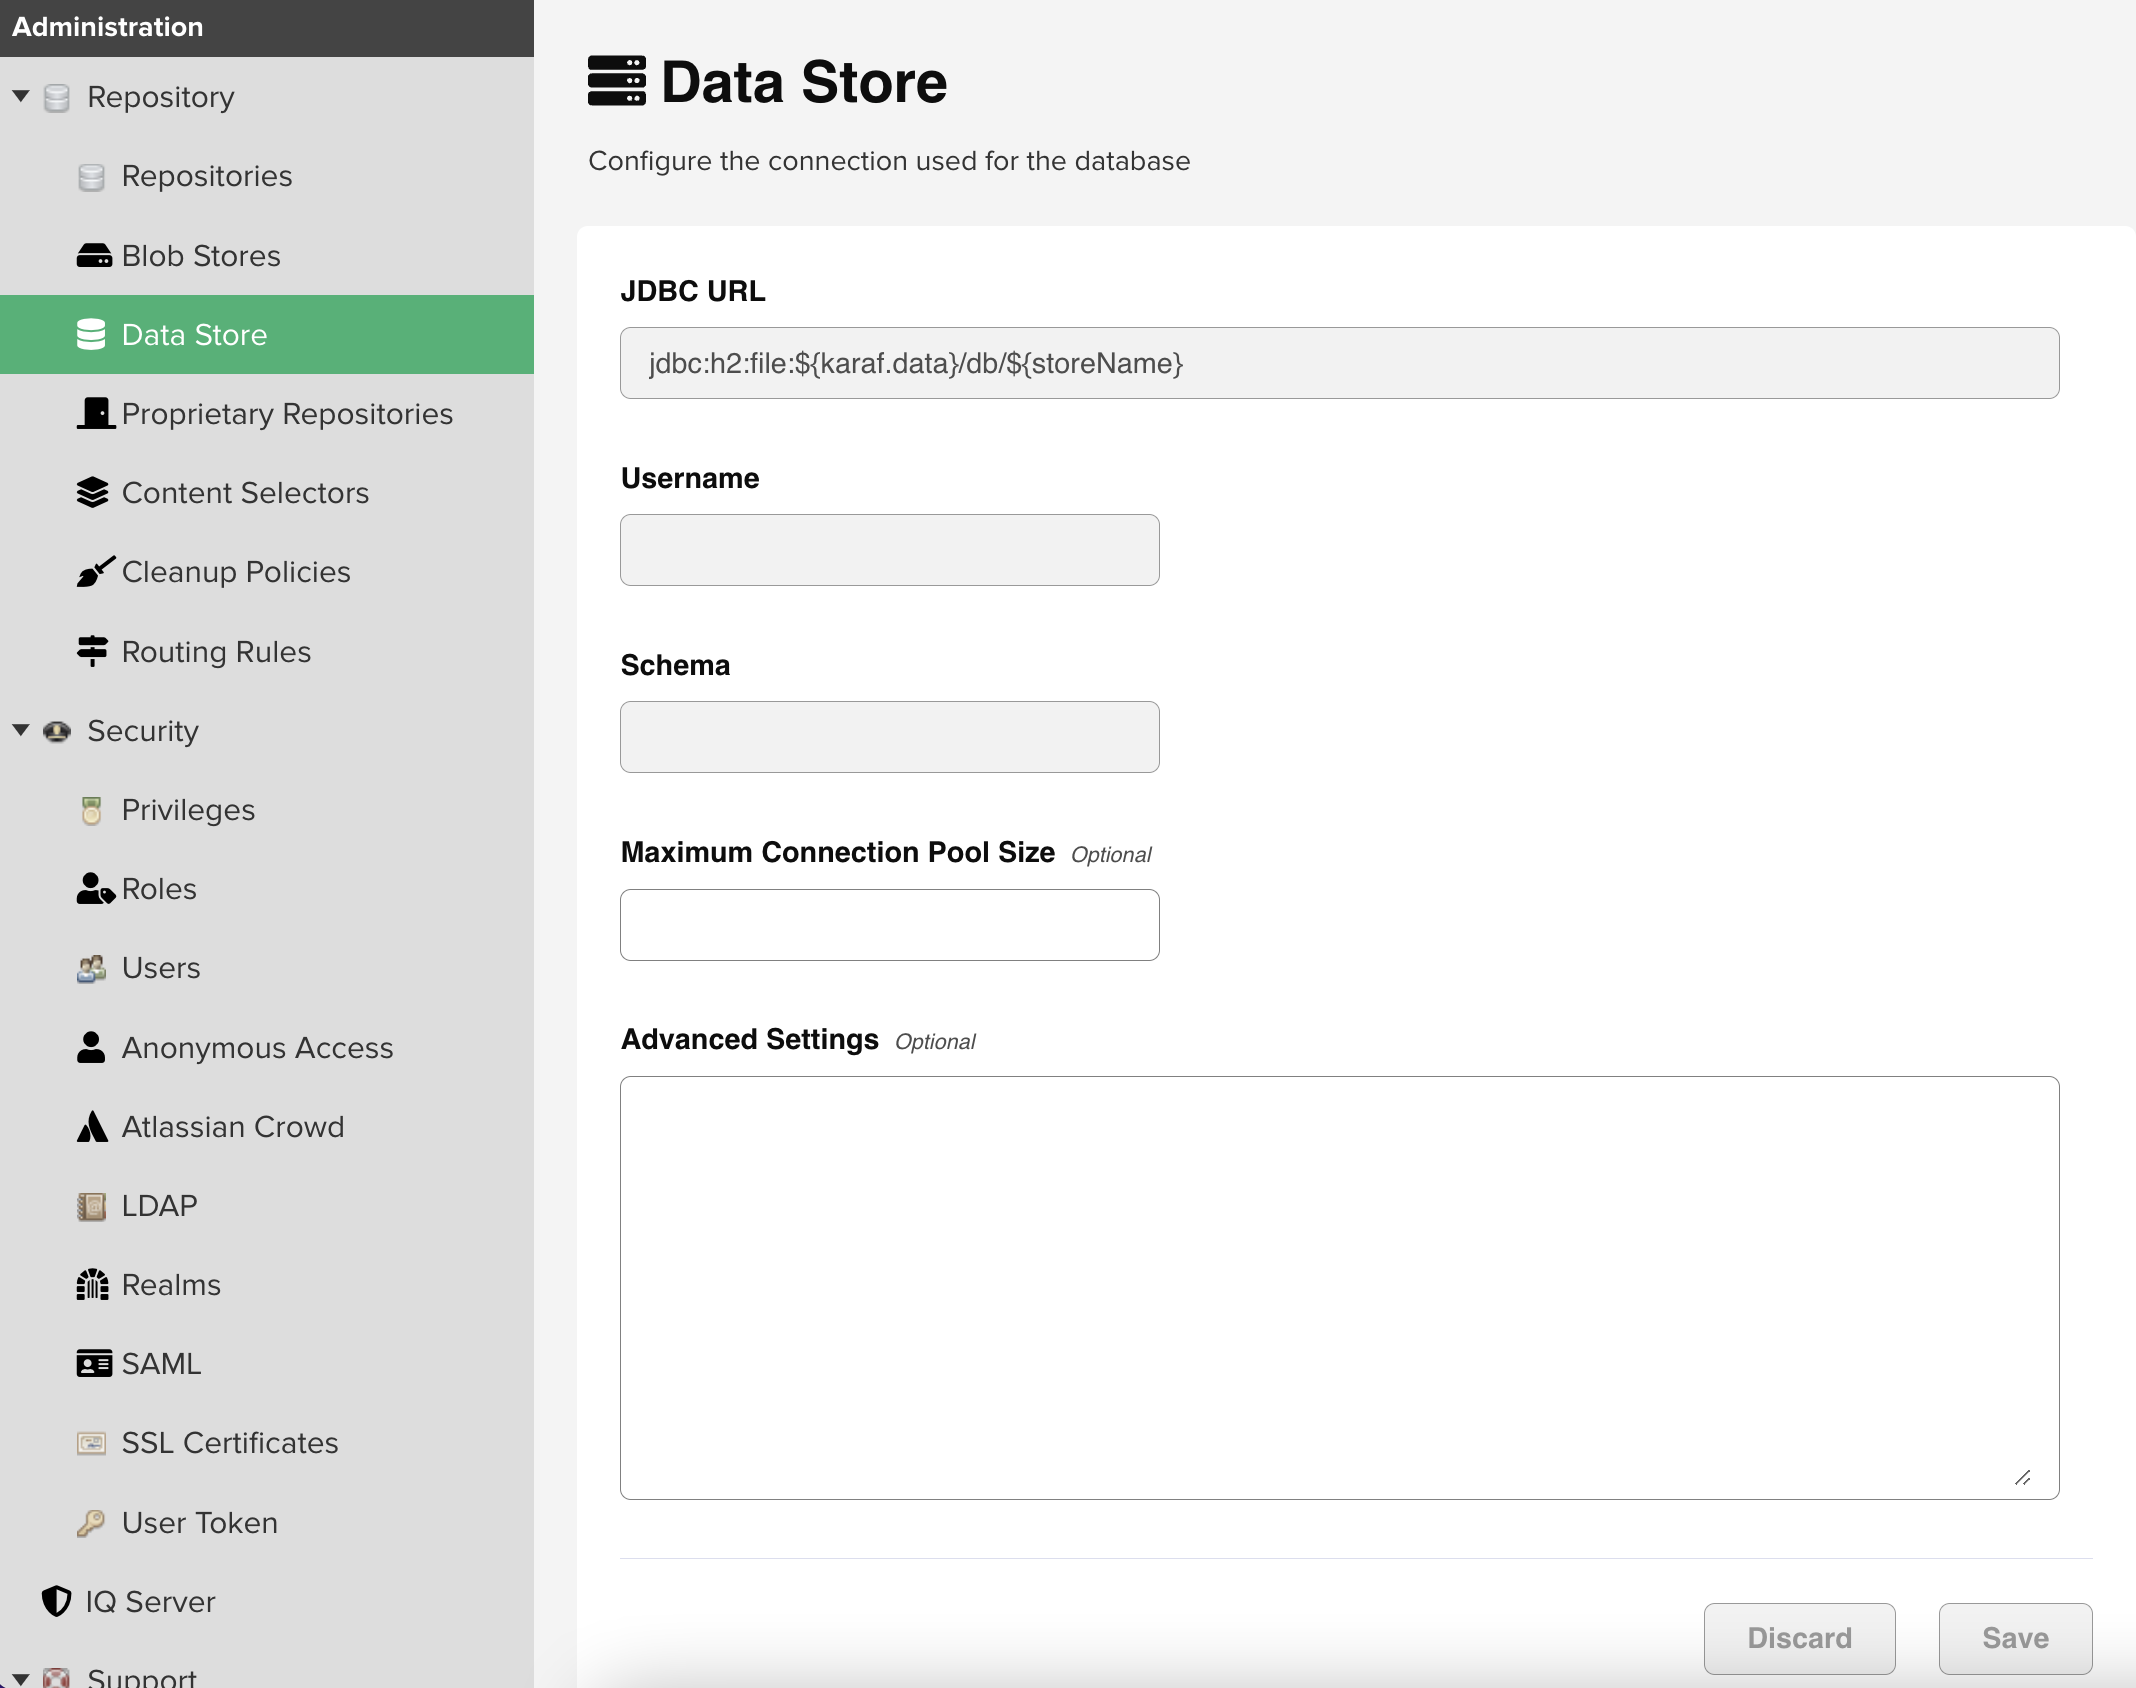 Data store screen with JDBC URL, Username, Schema, Maximum Connection Pool Size, and Advanced Settings fields